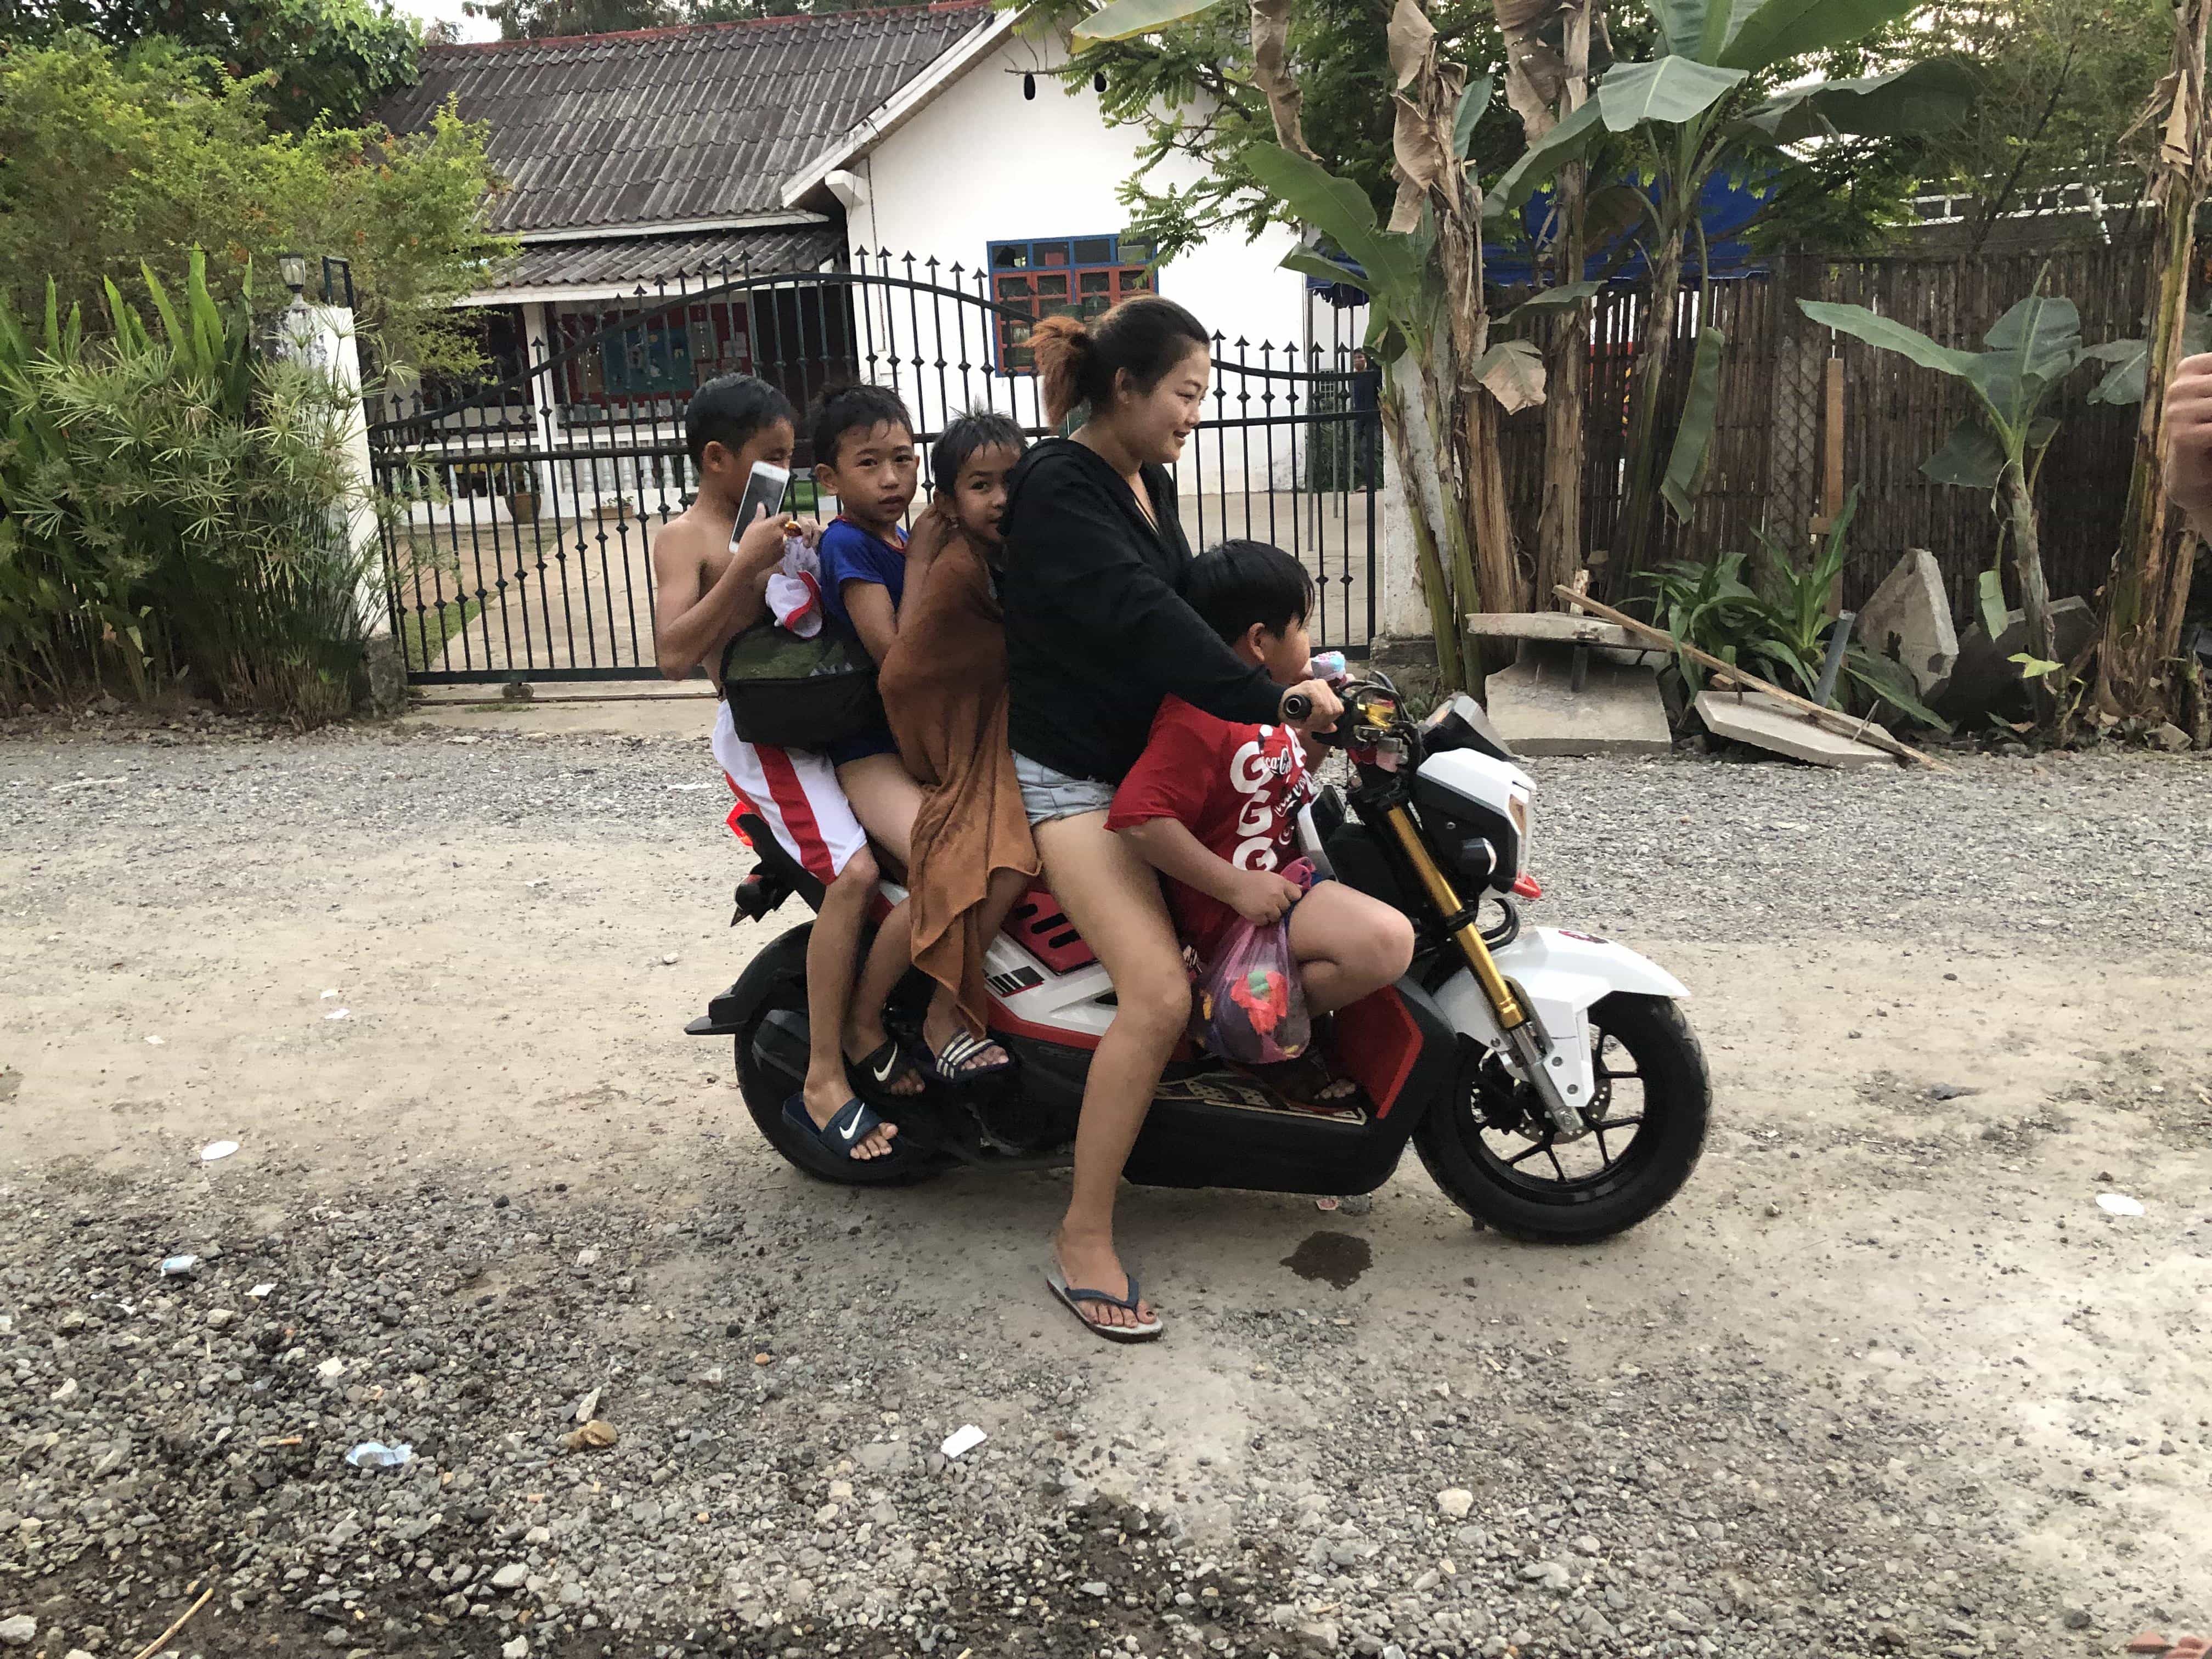 How many people can you fit on a scooter?